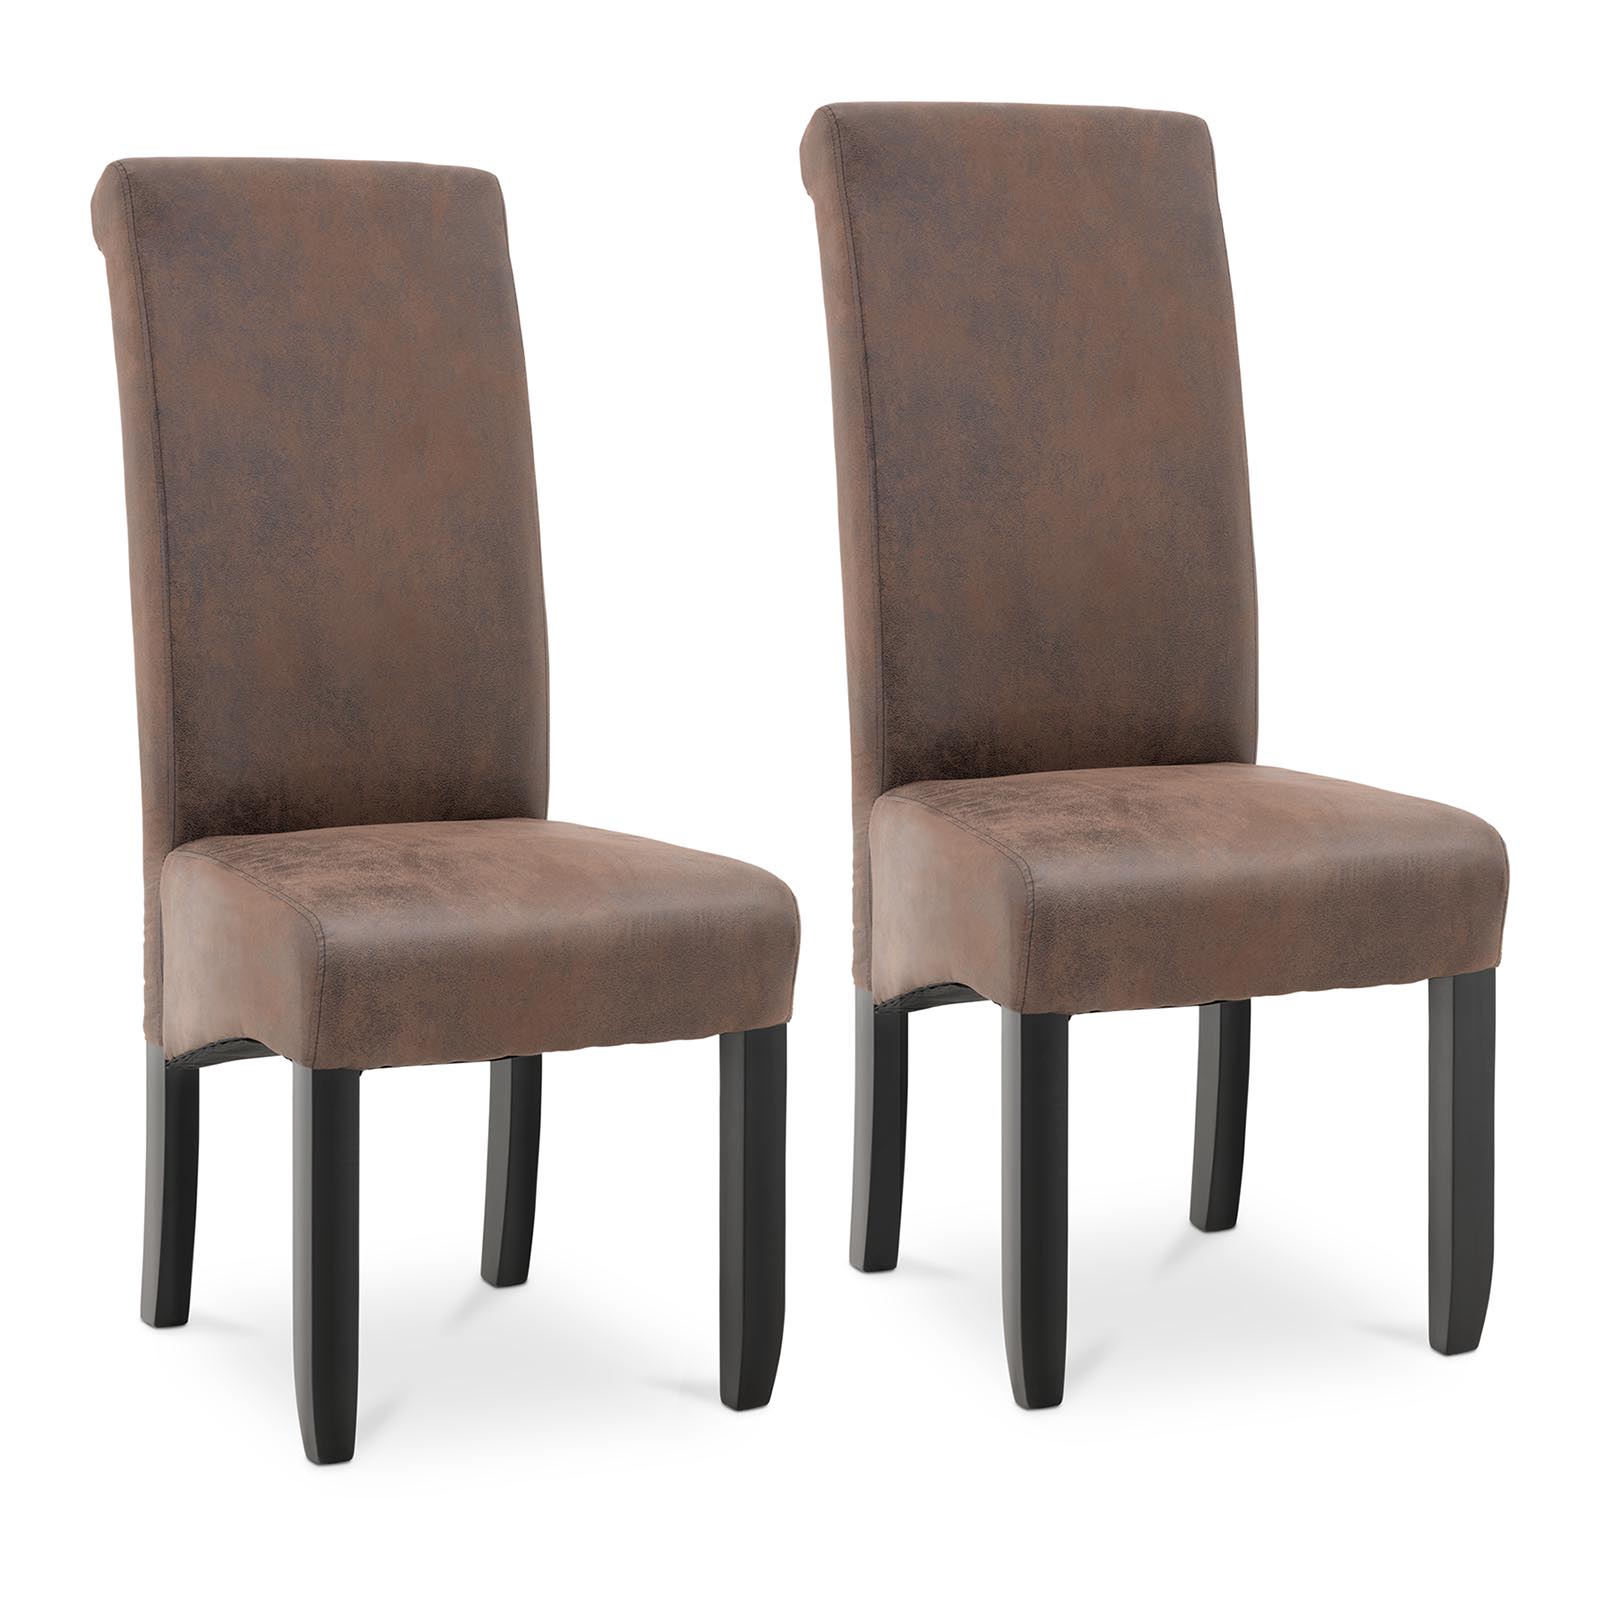 Upholstered Dining Chair - set of 2 - up to 180 kg - seat 44.5 x 44 cm - brown